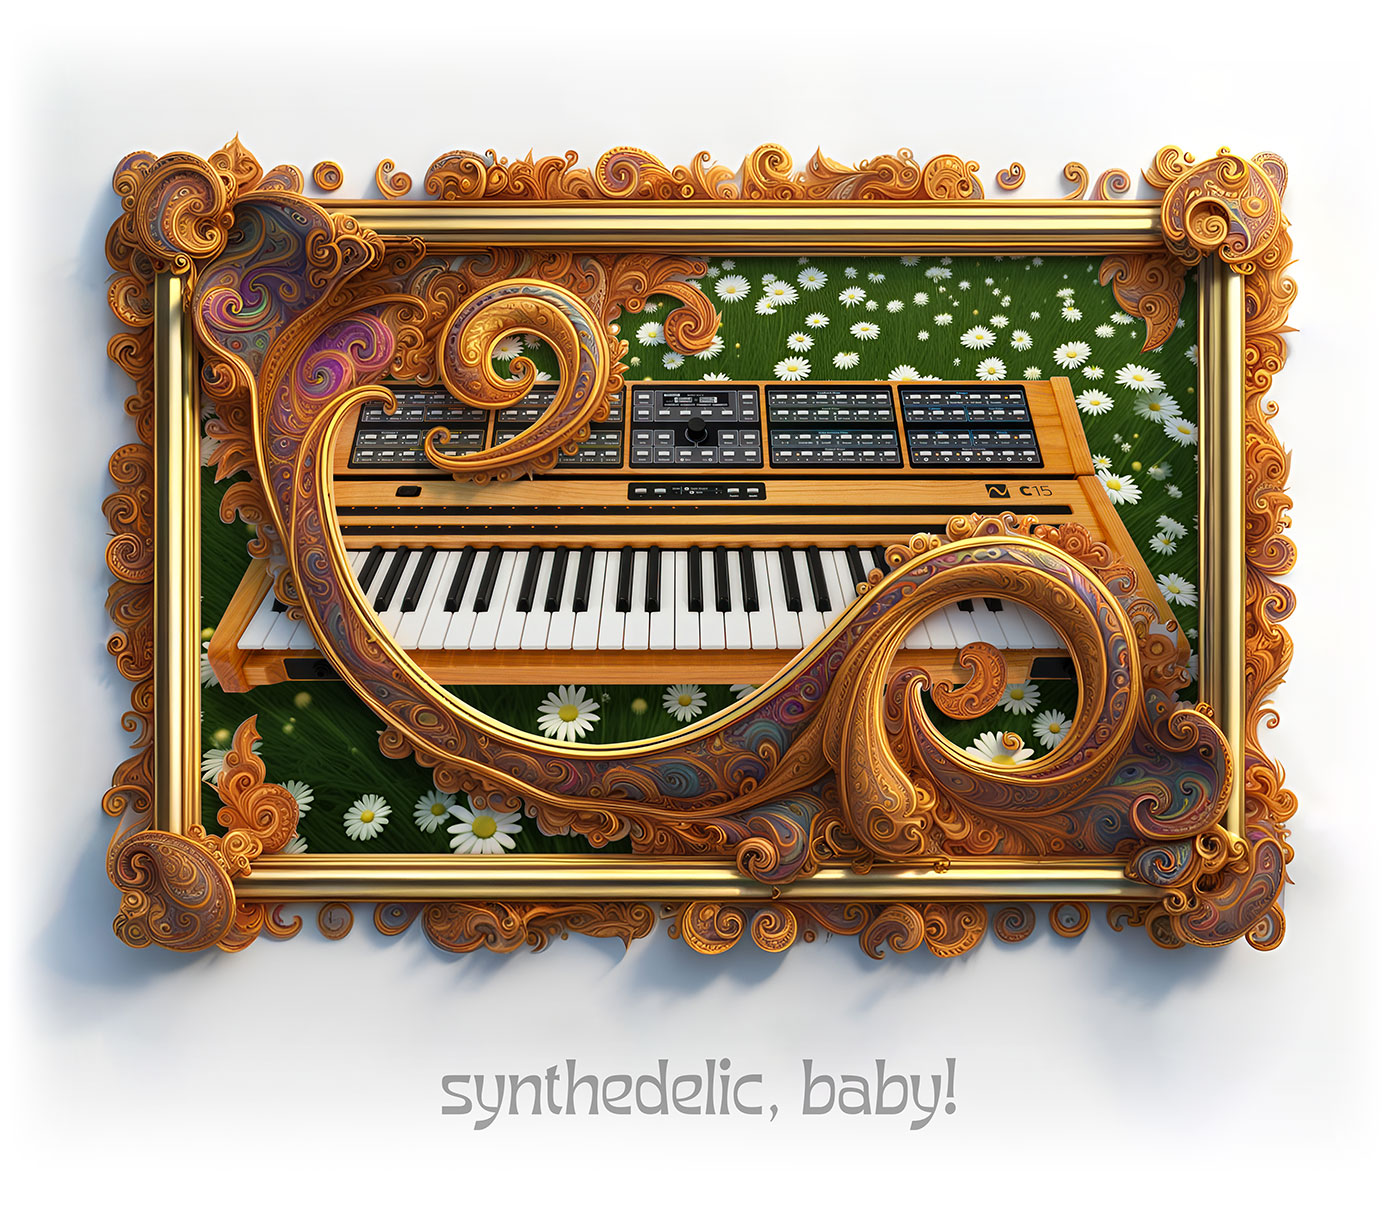 synthedelic, baby!